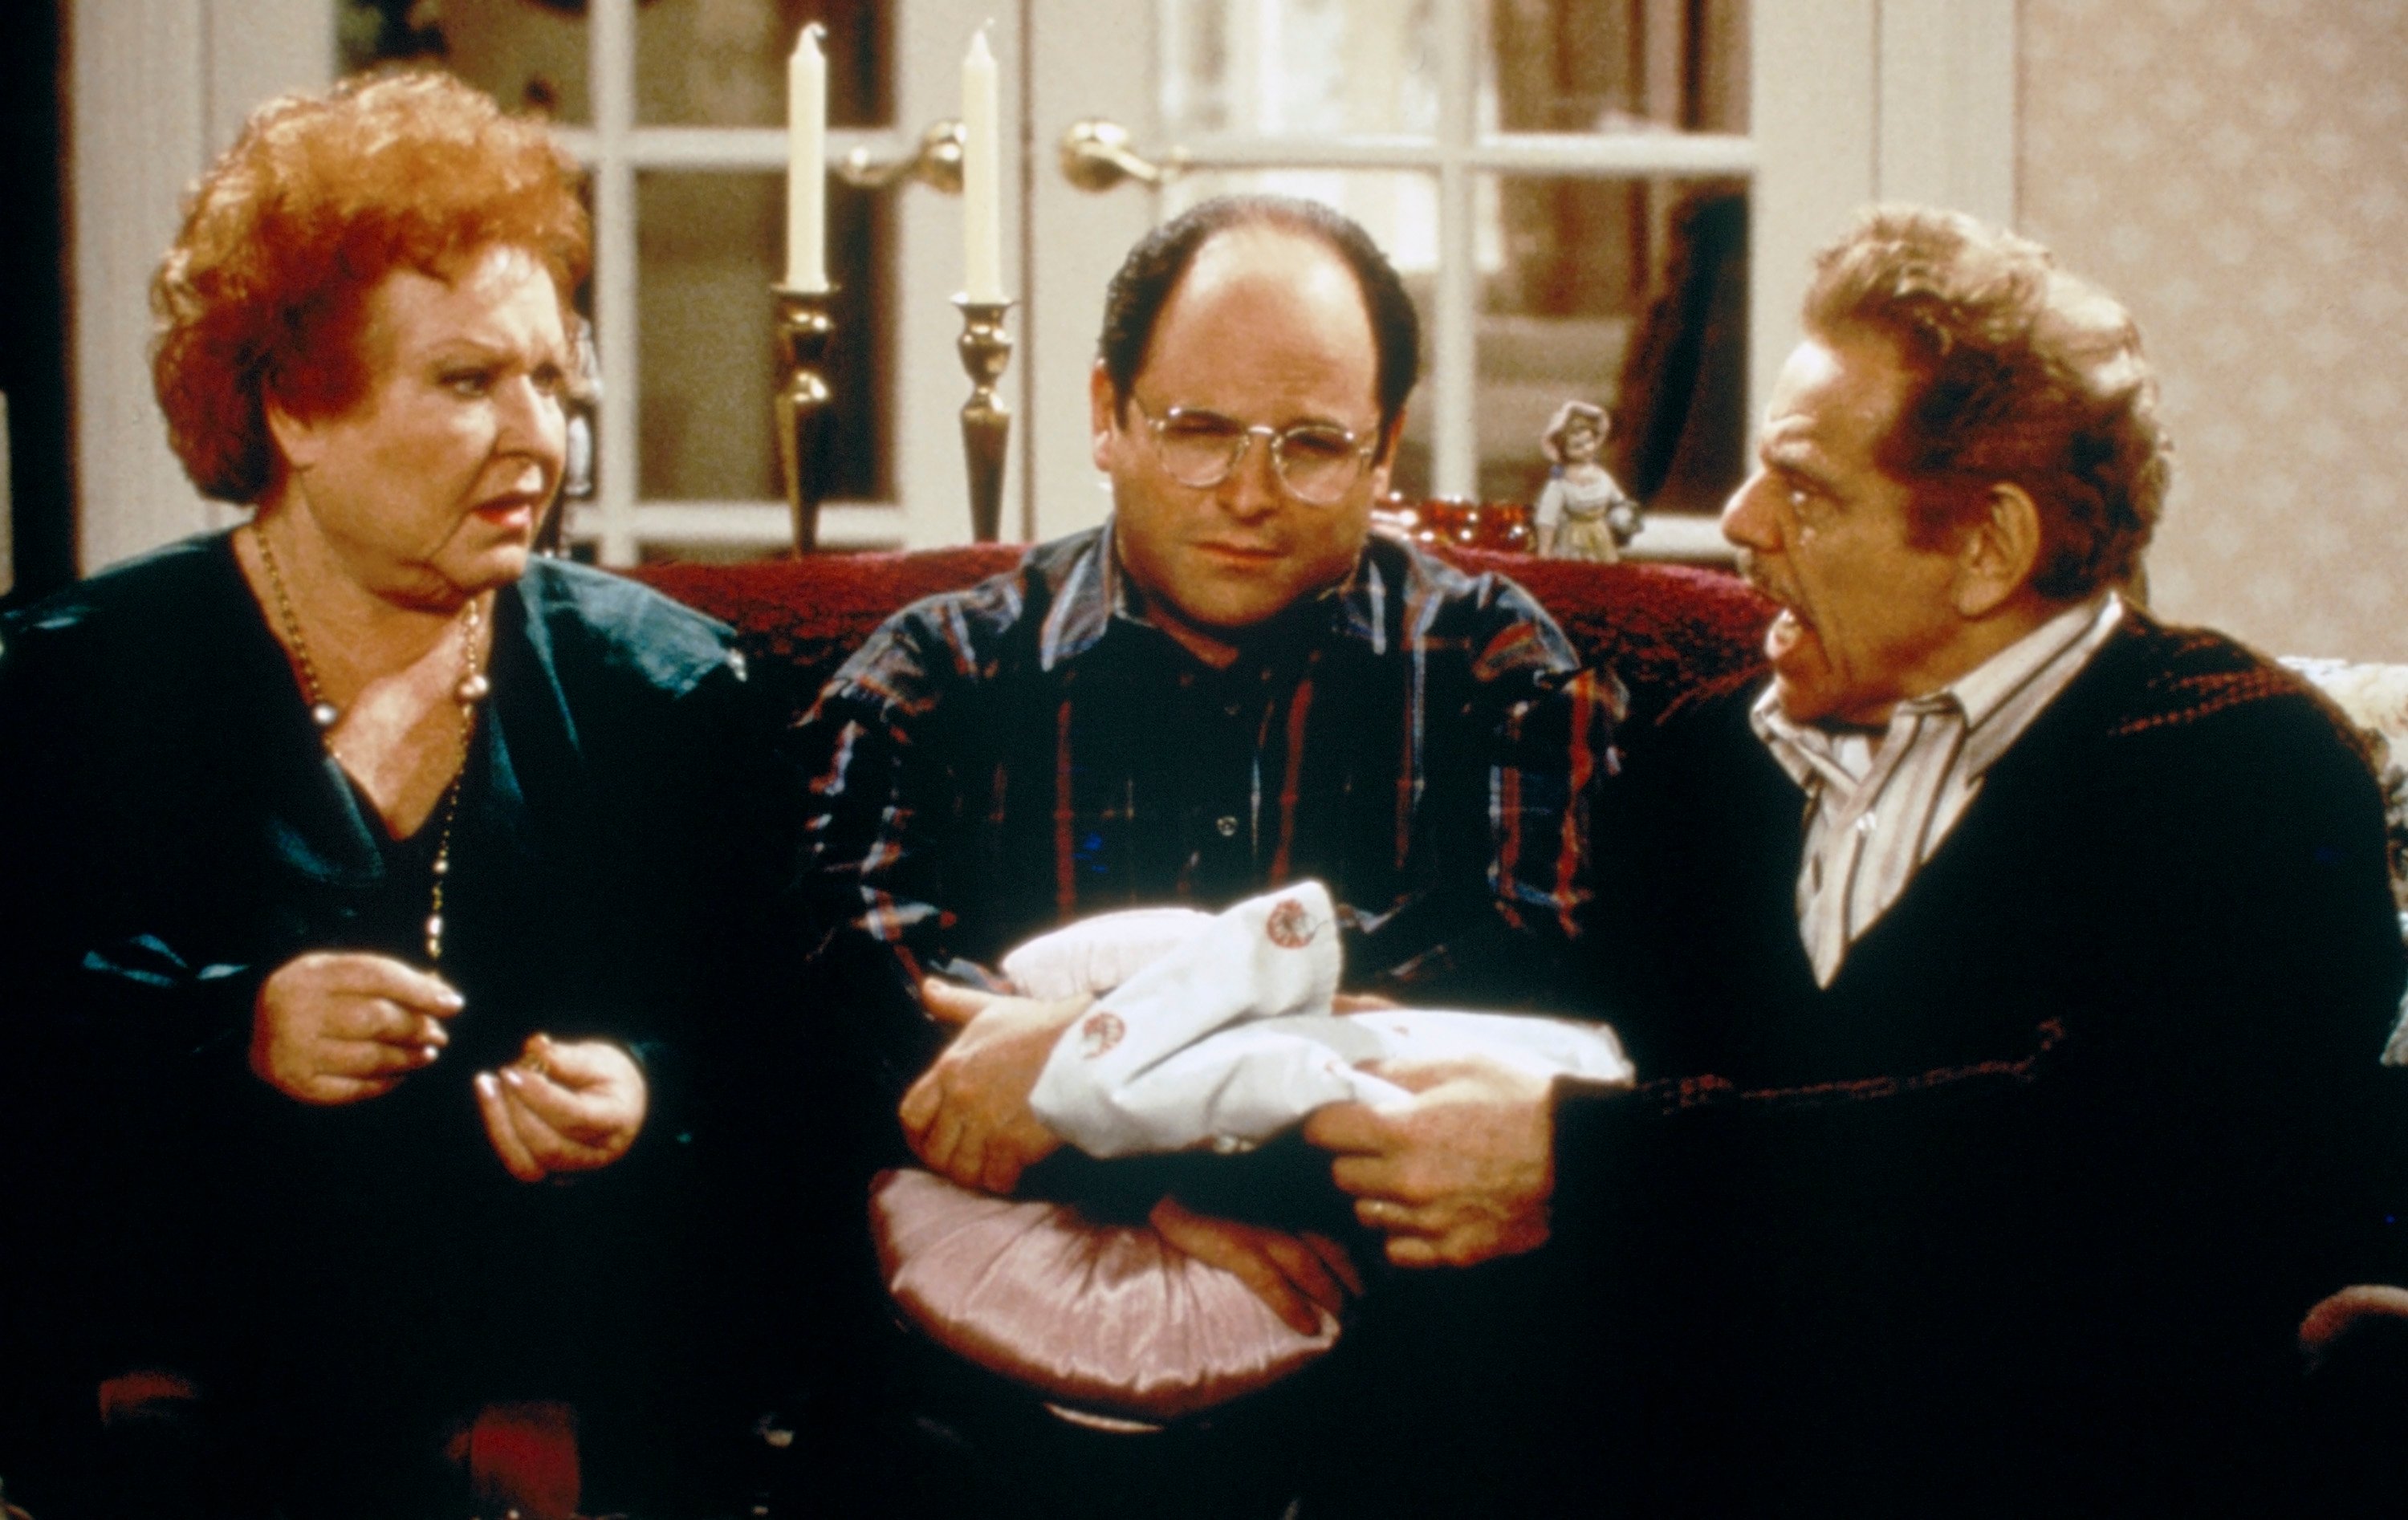 Estelle Harris as Estelle Costanza, Jason Alexander as George Costanza and Jerry Stiller as Frank Costanza in their living room in an episode of 'Seinfeld'